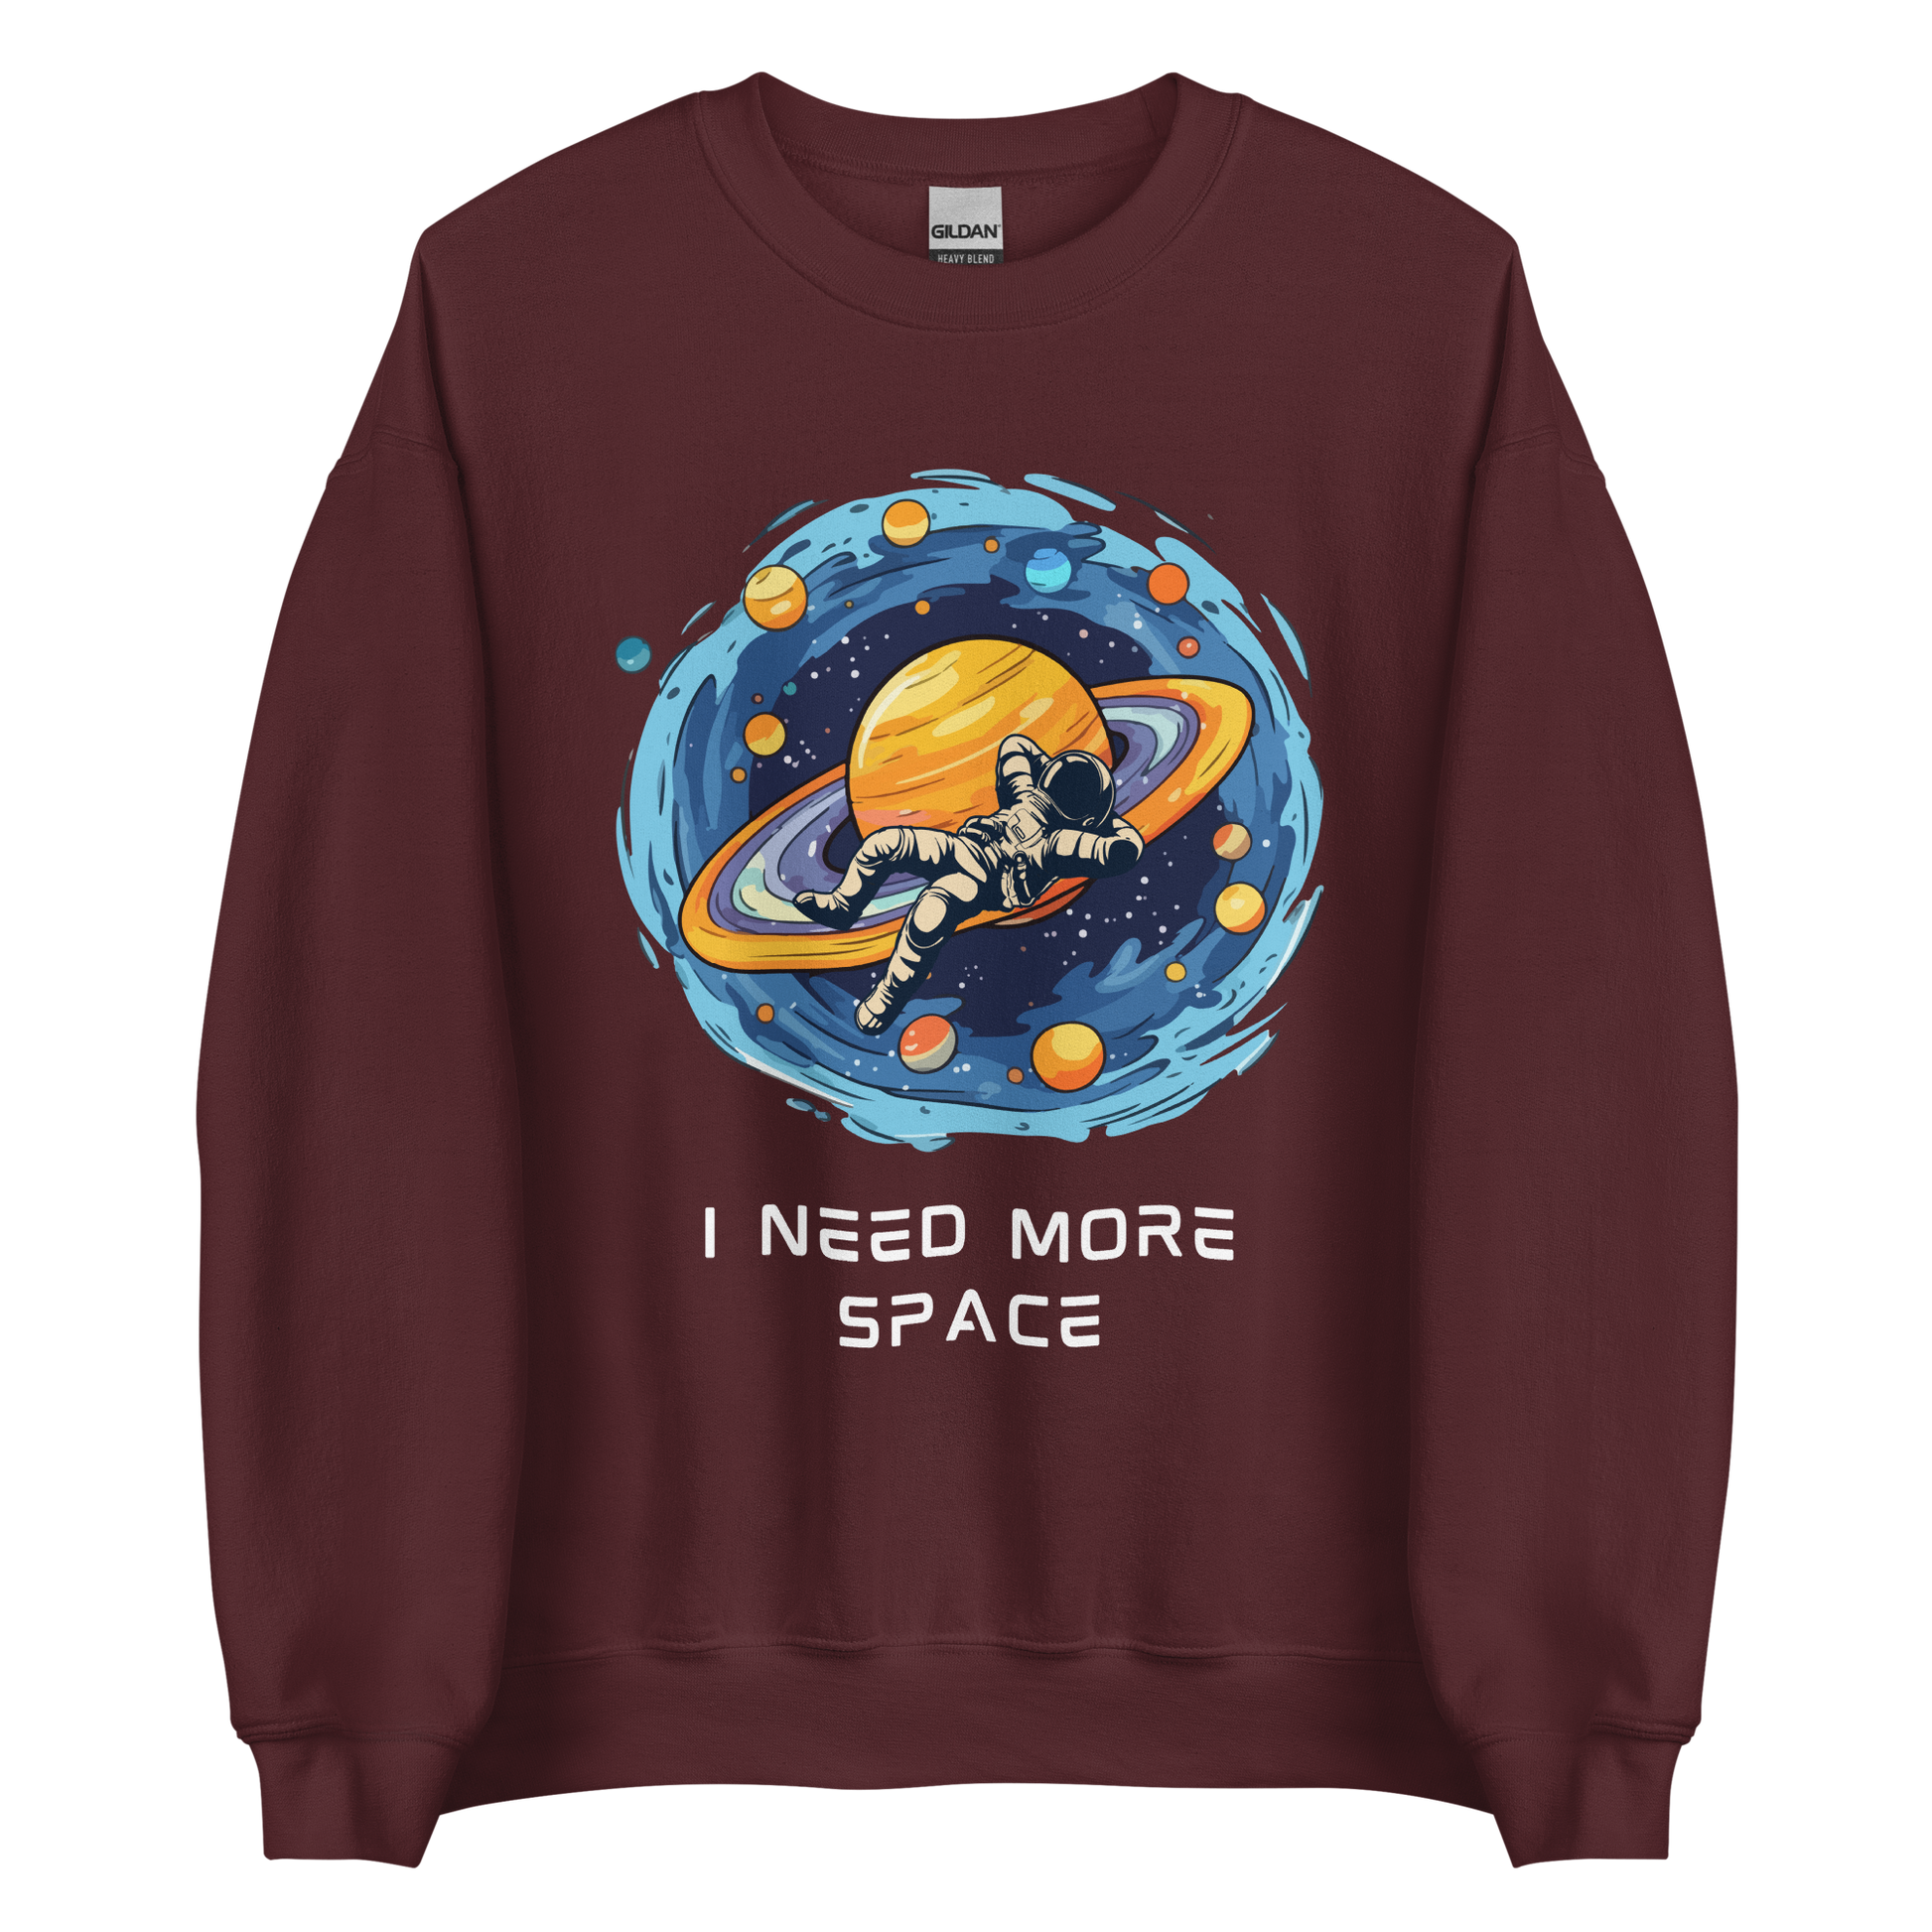 Maroon Astronaut Sweatshirt featuring a captivating I Need More Space graphic on the chest - Funny Graphic Space Sweatshirts - Boozy Fox